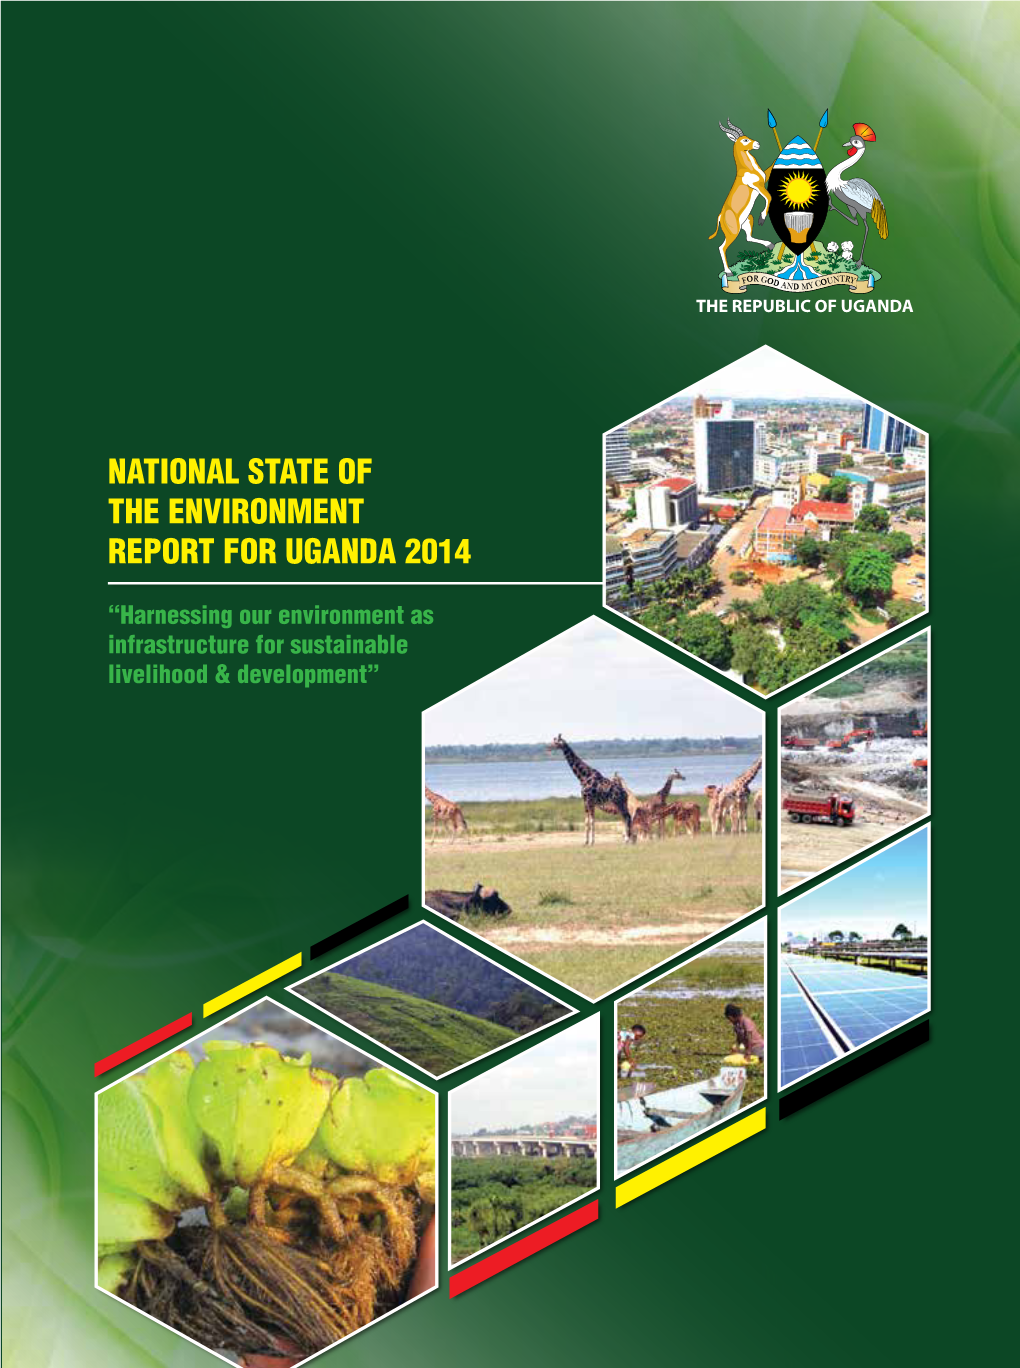 National State of the Environment Report for Uganda 2014